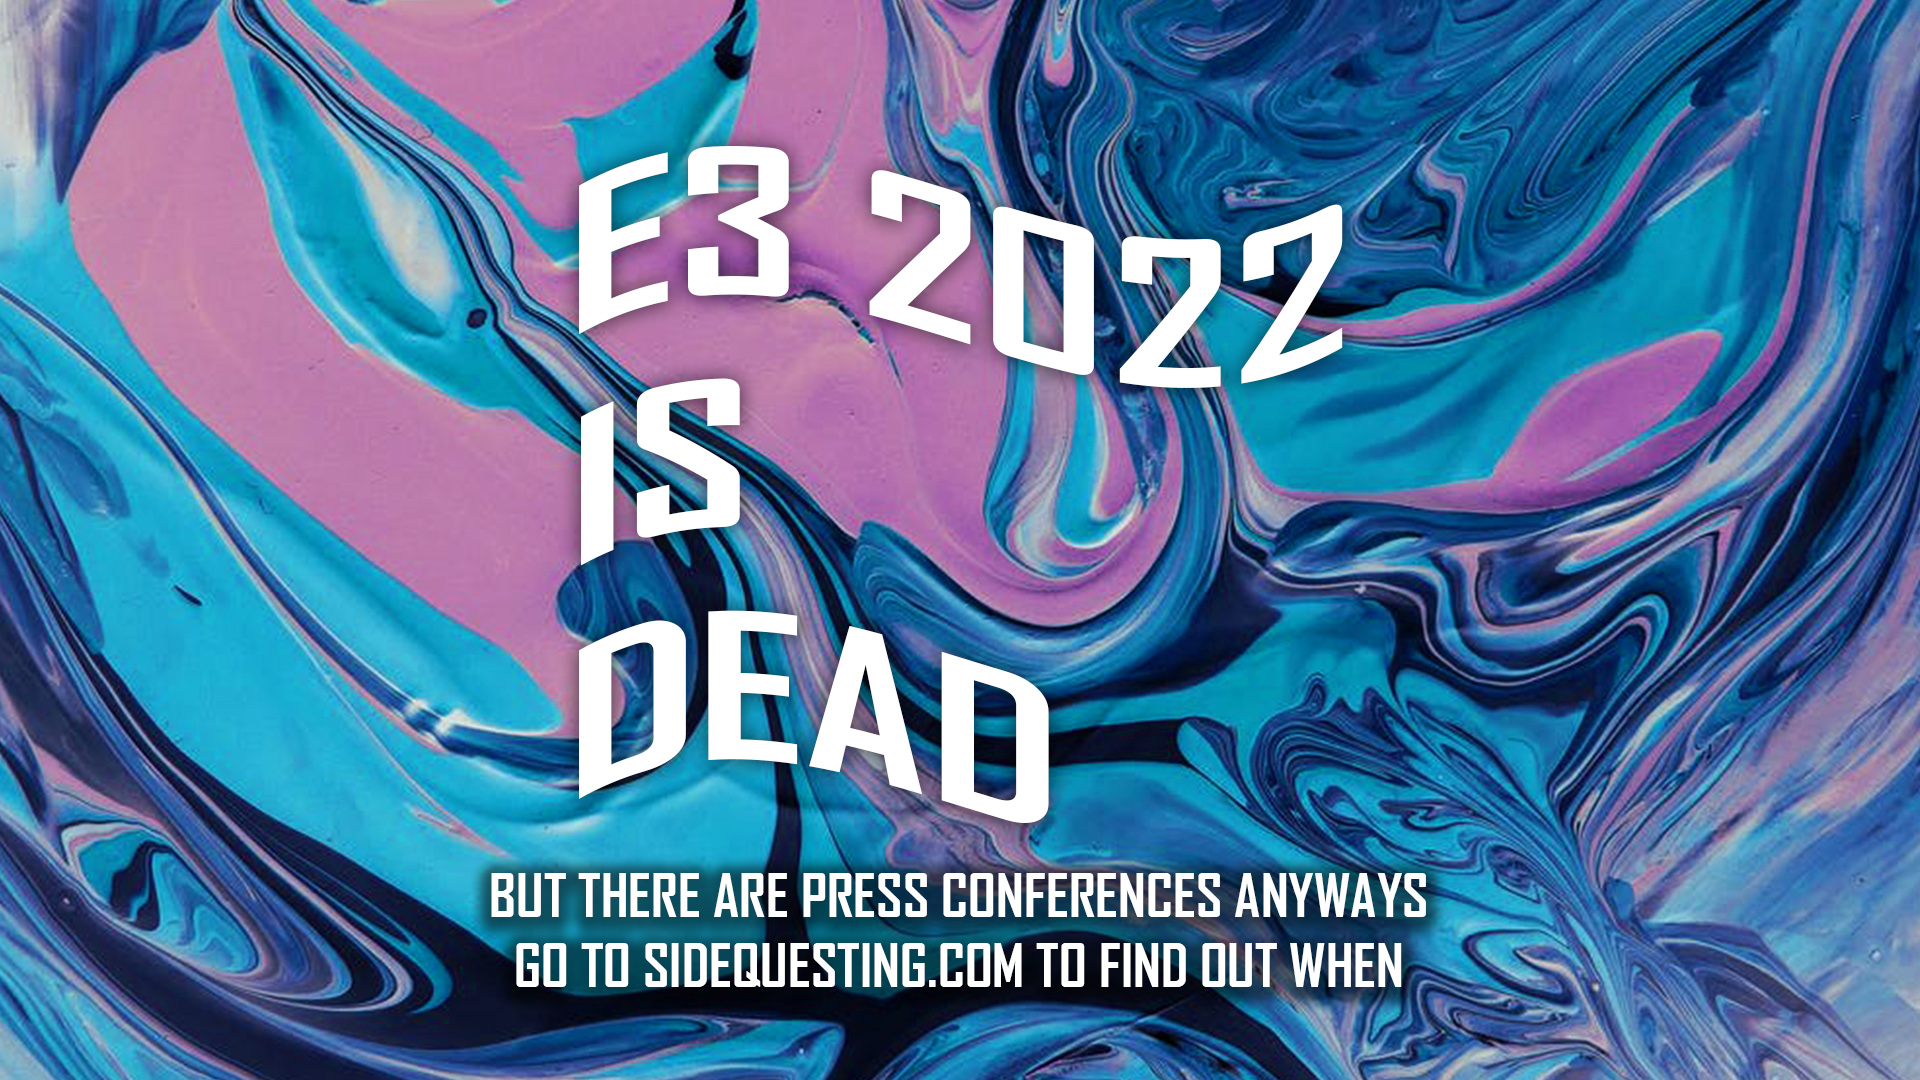 The E3 2022 press conference schedule dates & times